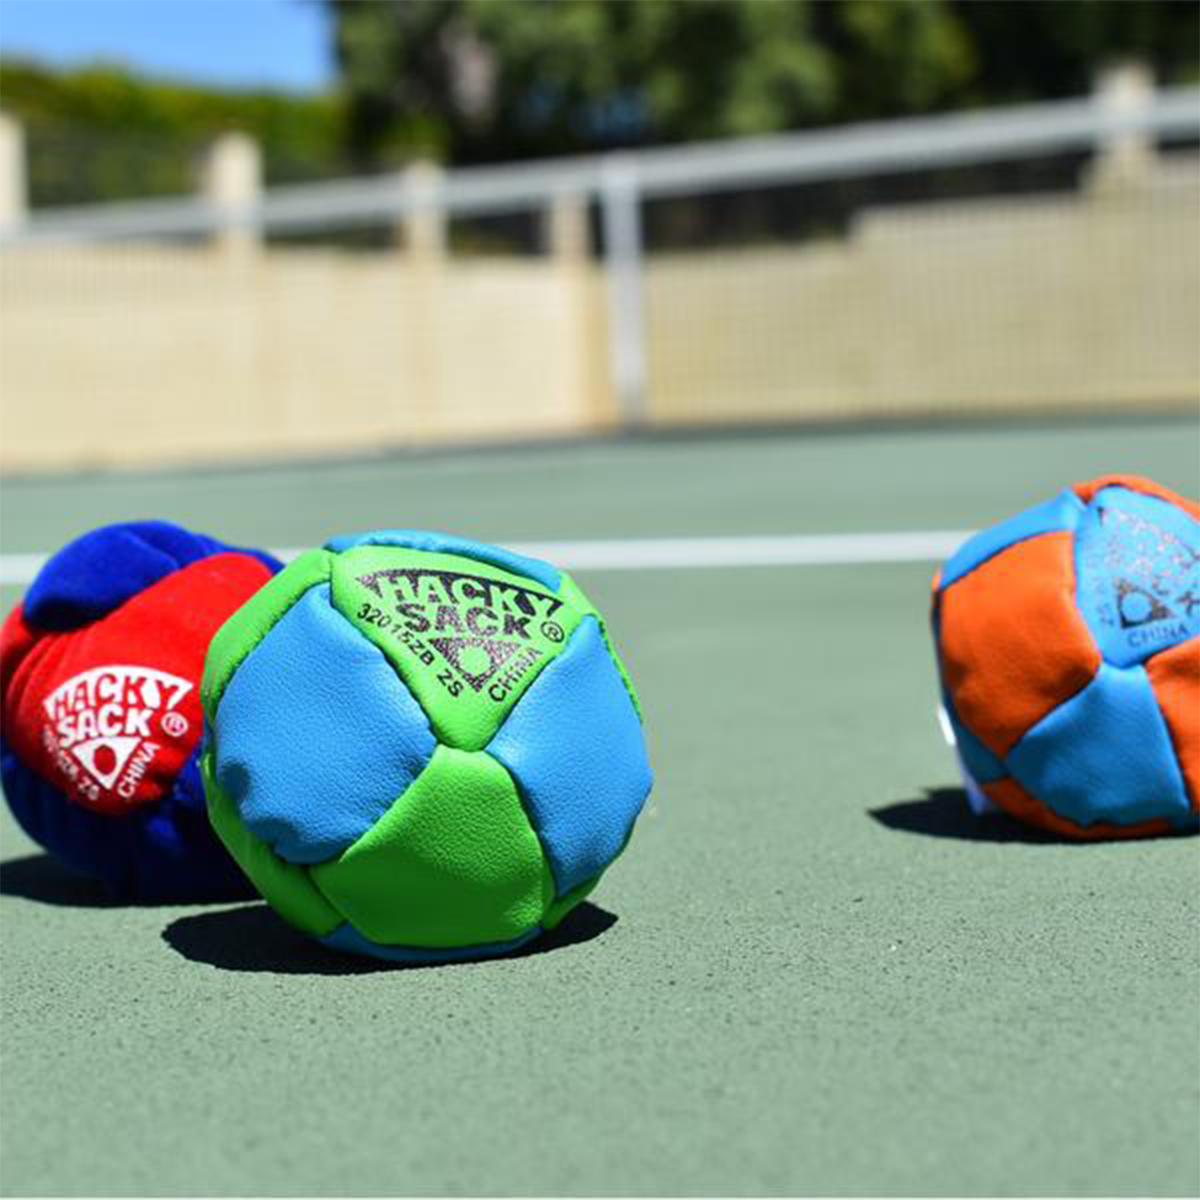 Wham-O Hacky Sack® Assortment actual product in the Tennis Court